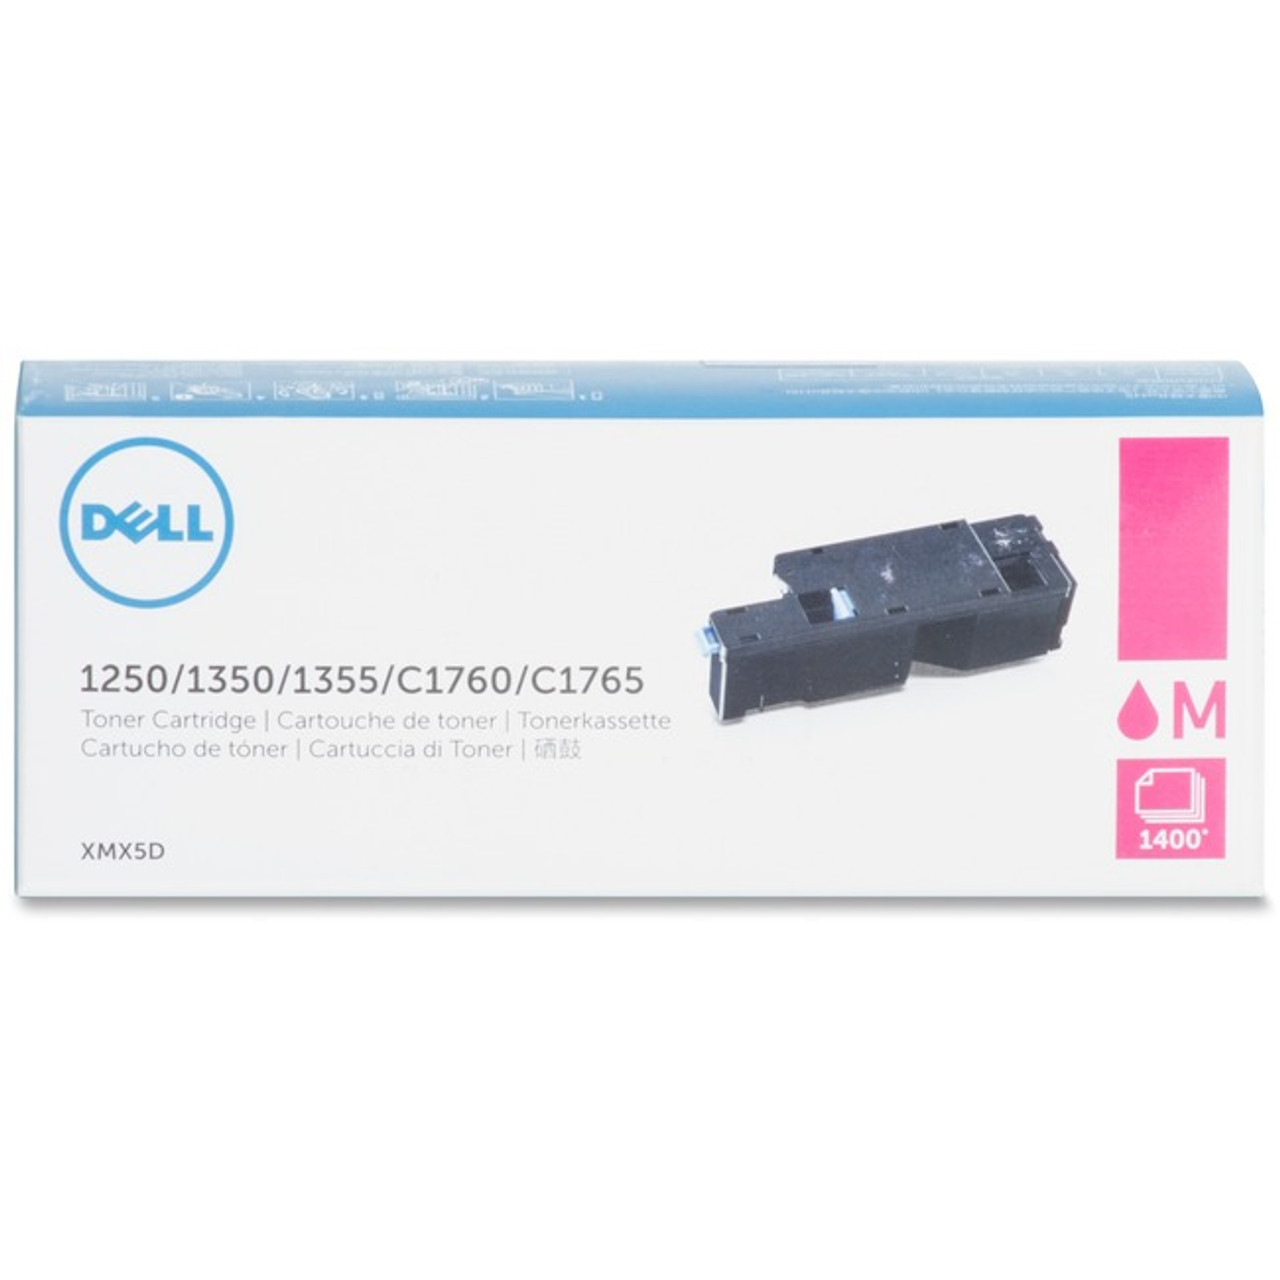 Dell XMX5D